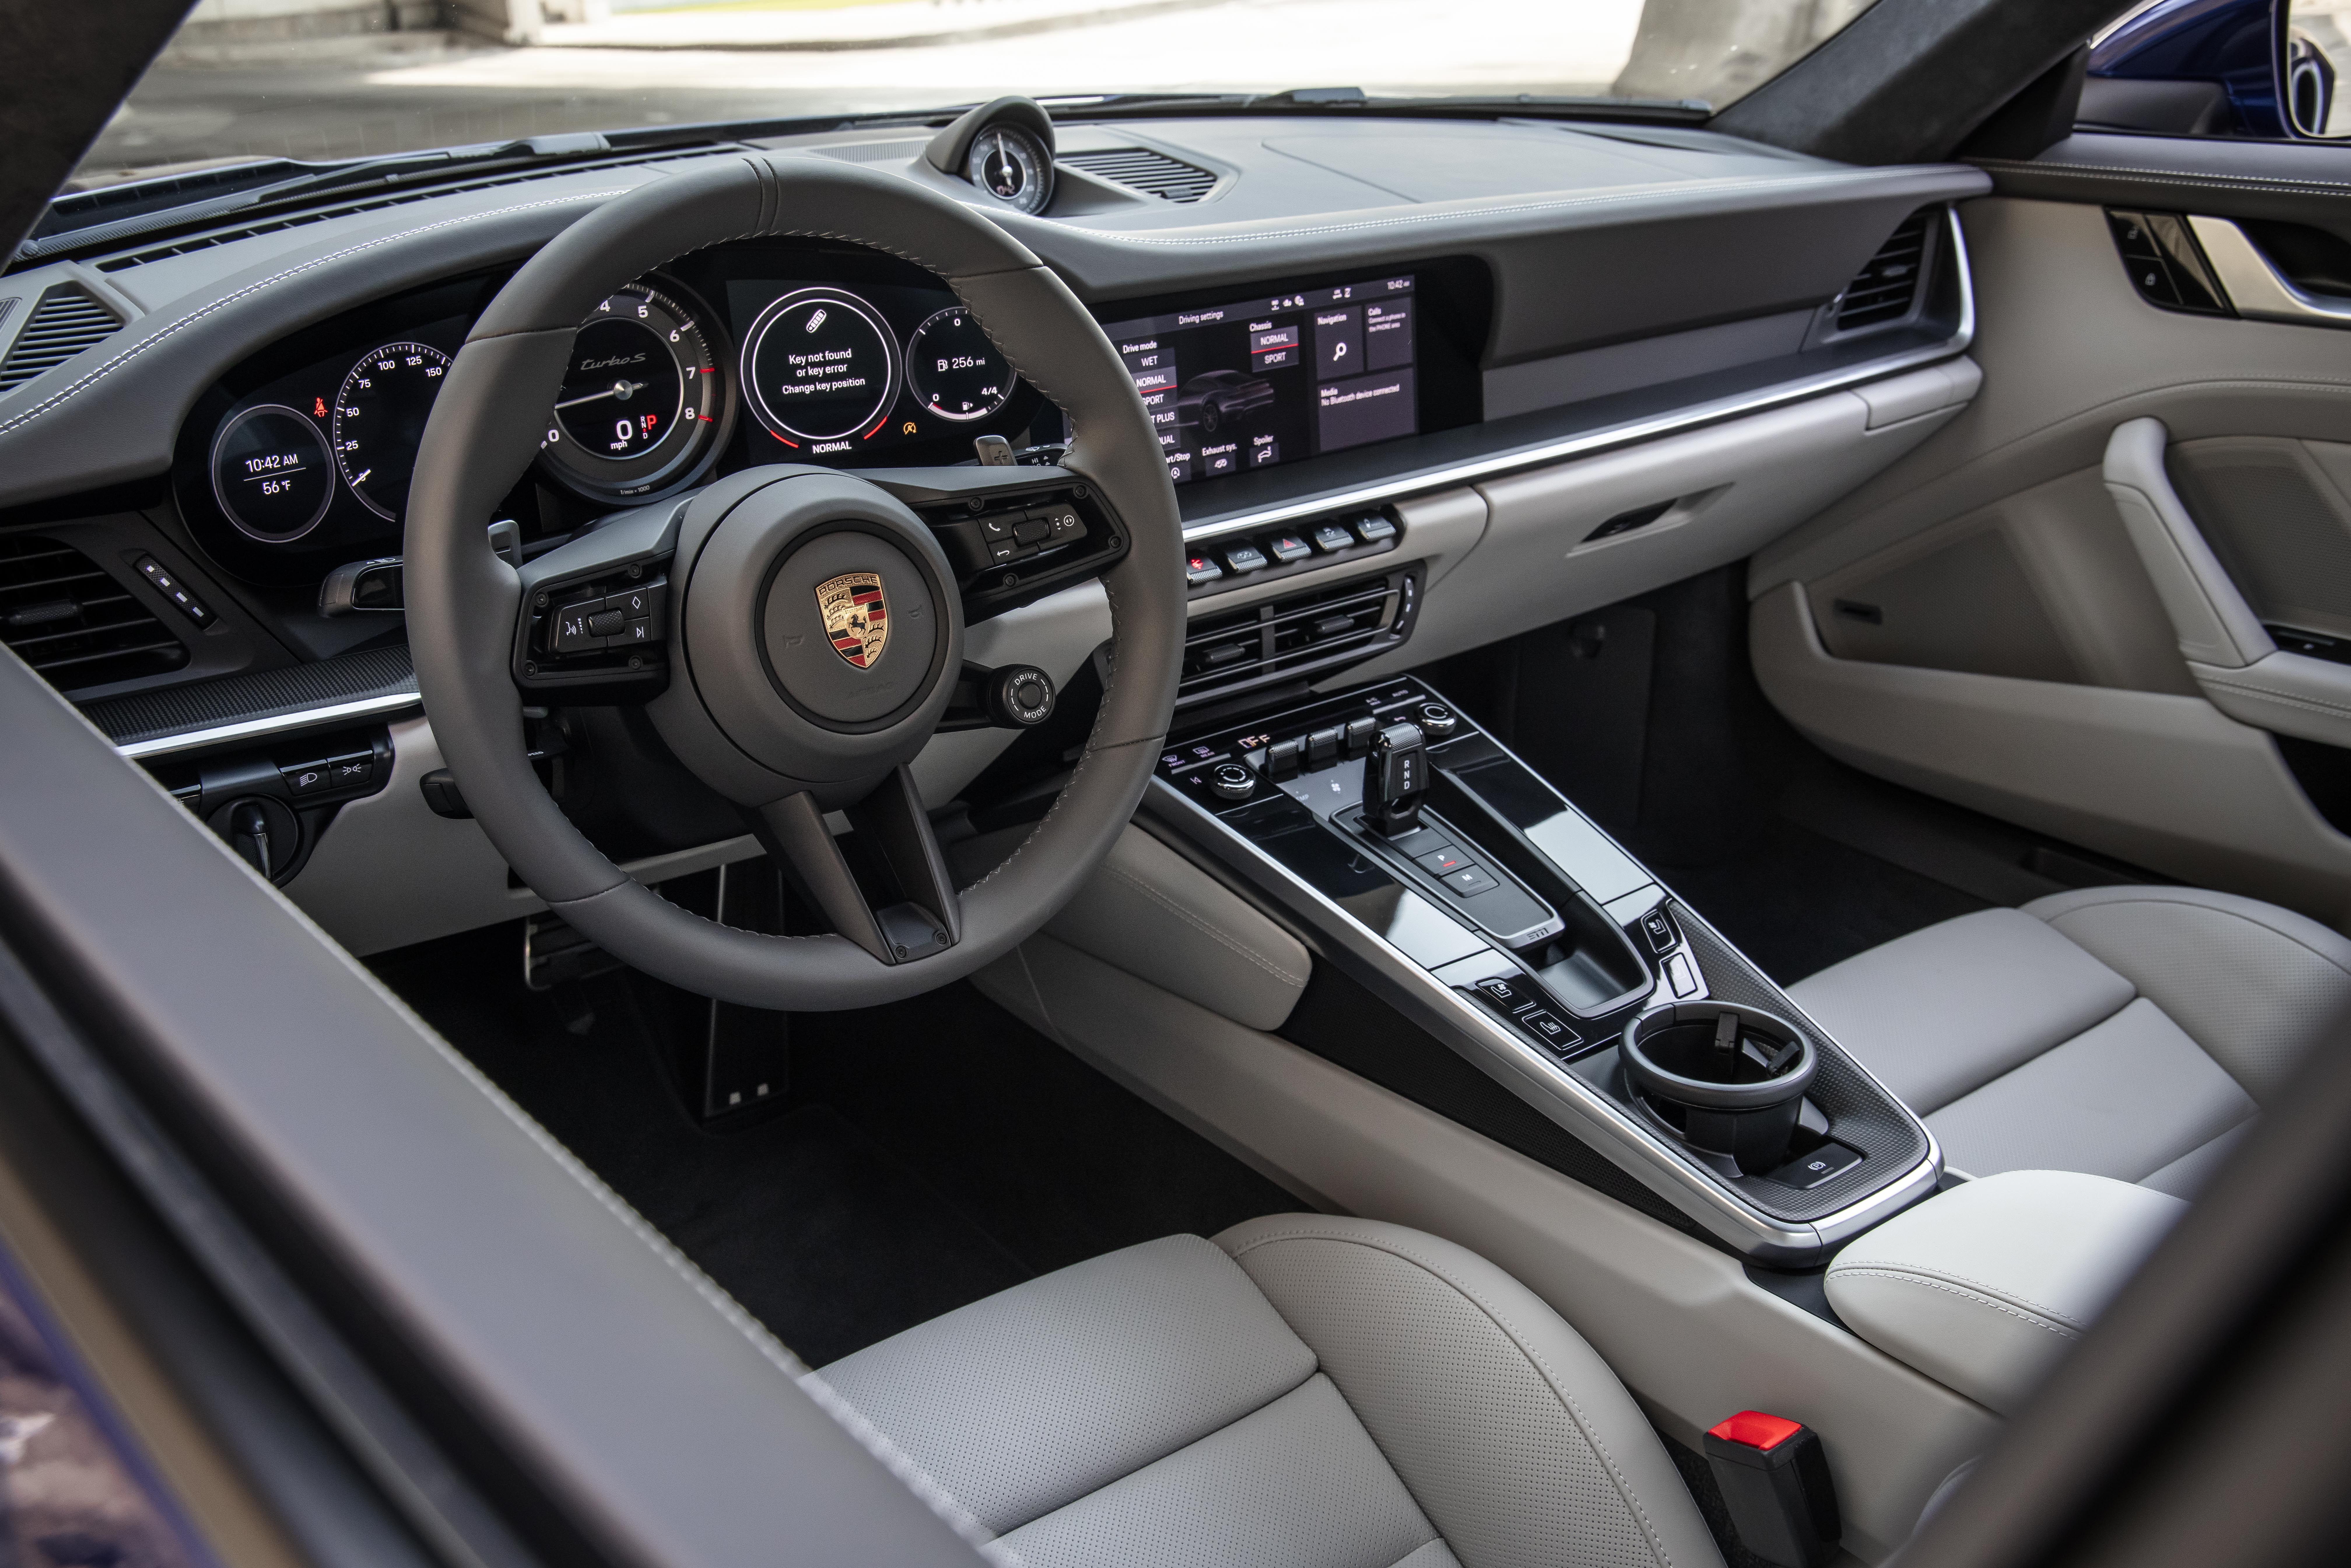 2021 Porsche 911 Turbo S Review: A New Benchmark for Sports Cars - Bloomberg